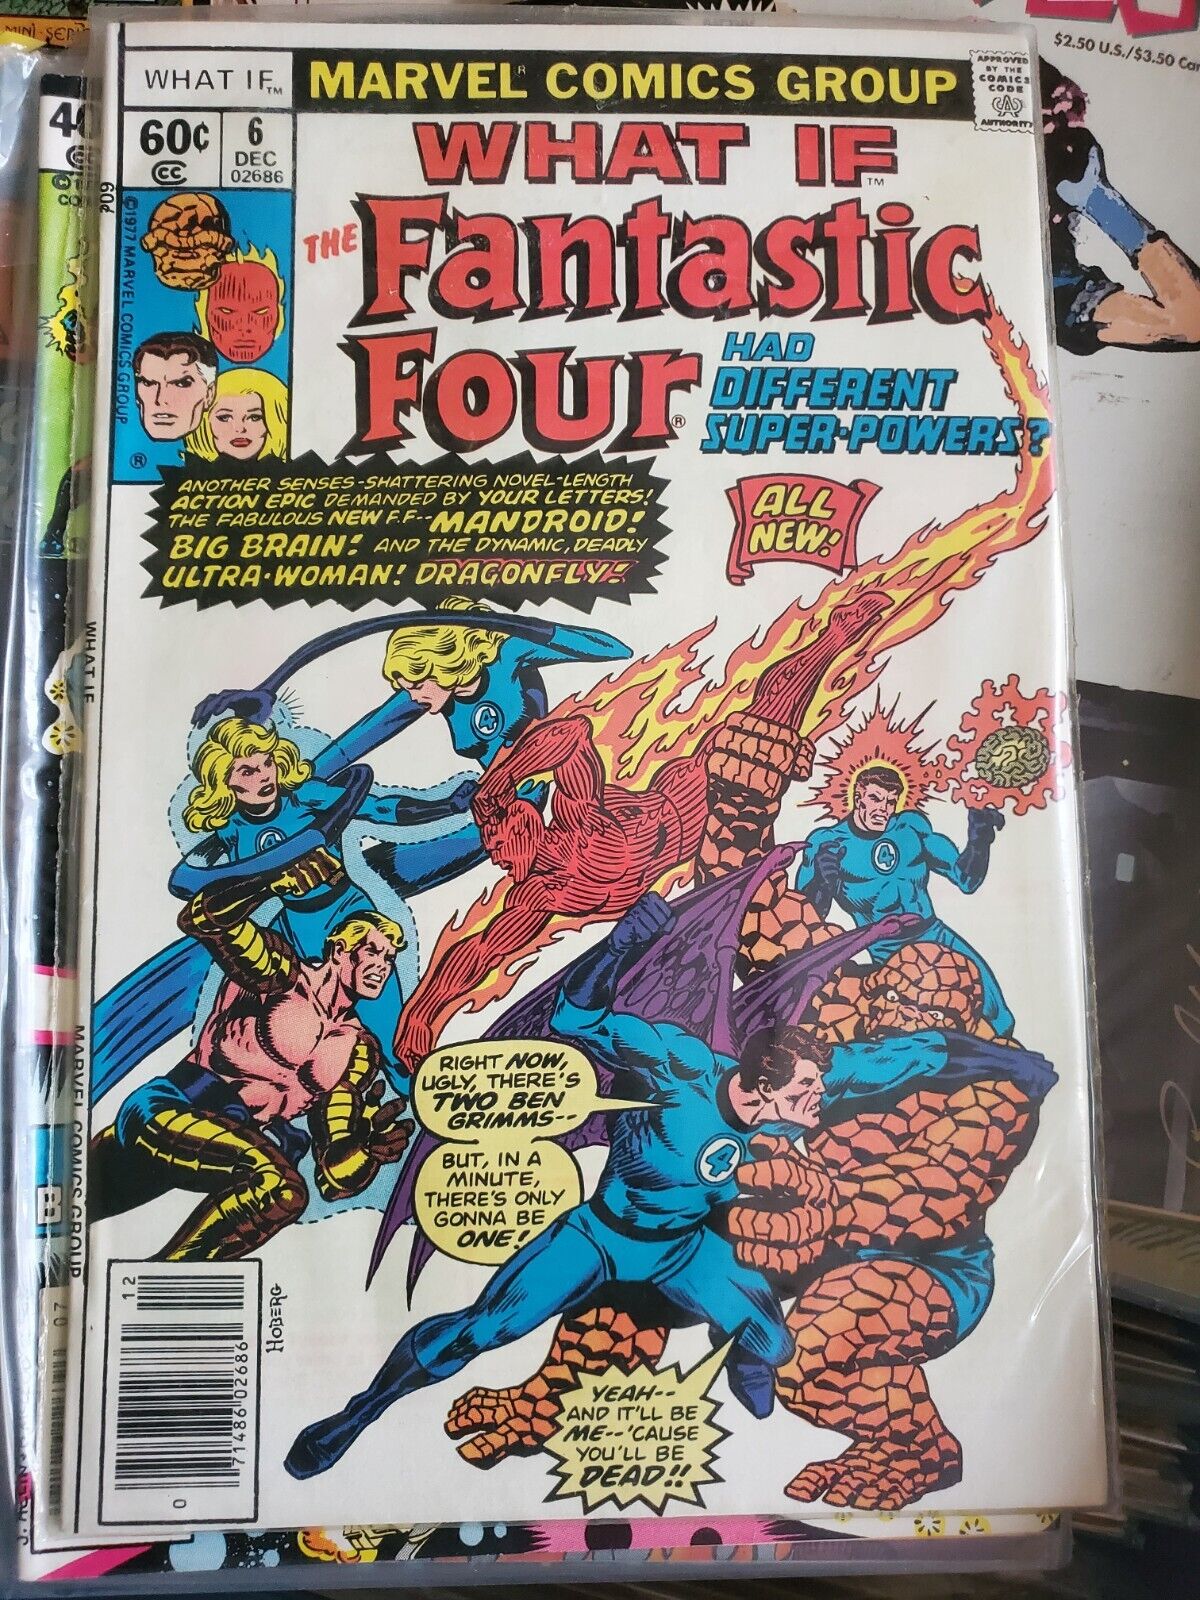 Marvel Comics What If...? #6 The Fantastic Four Had Different Super-Powers? VF